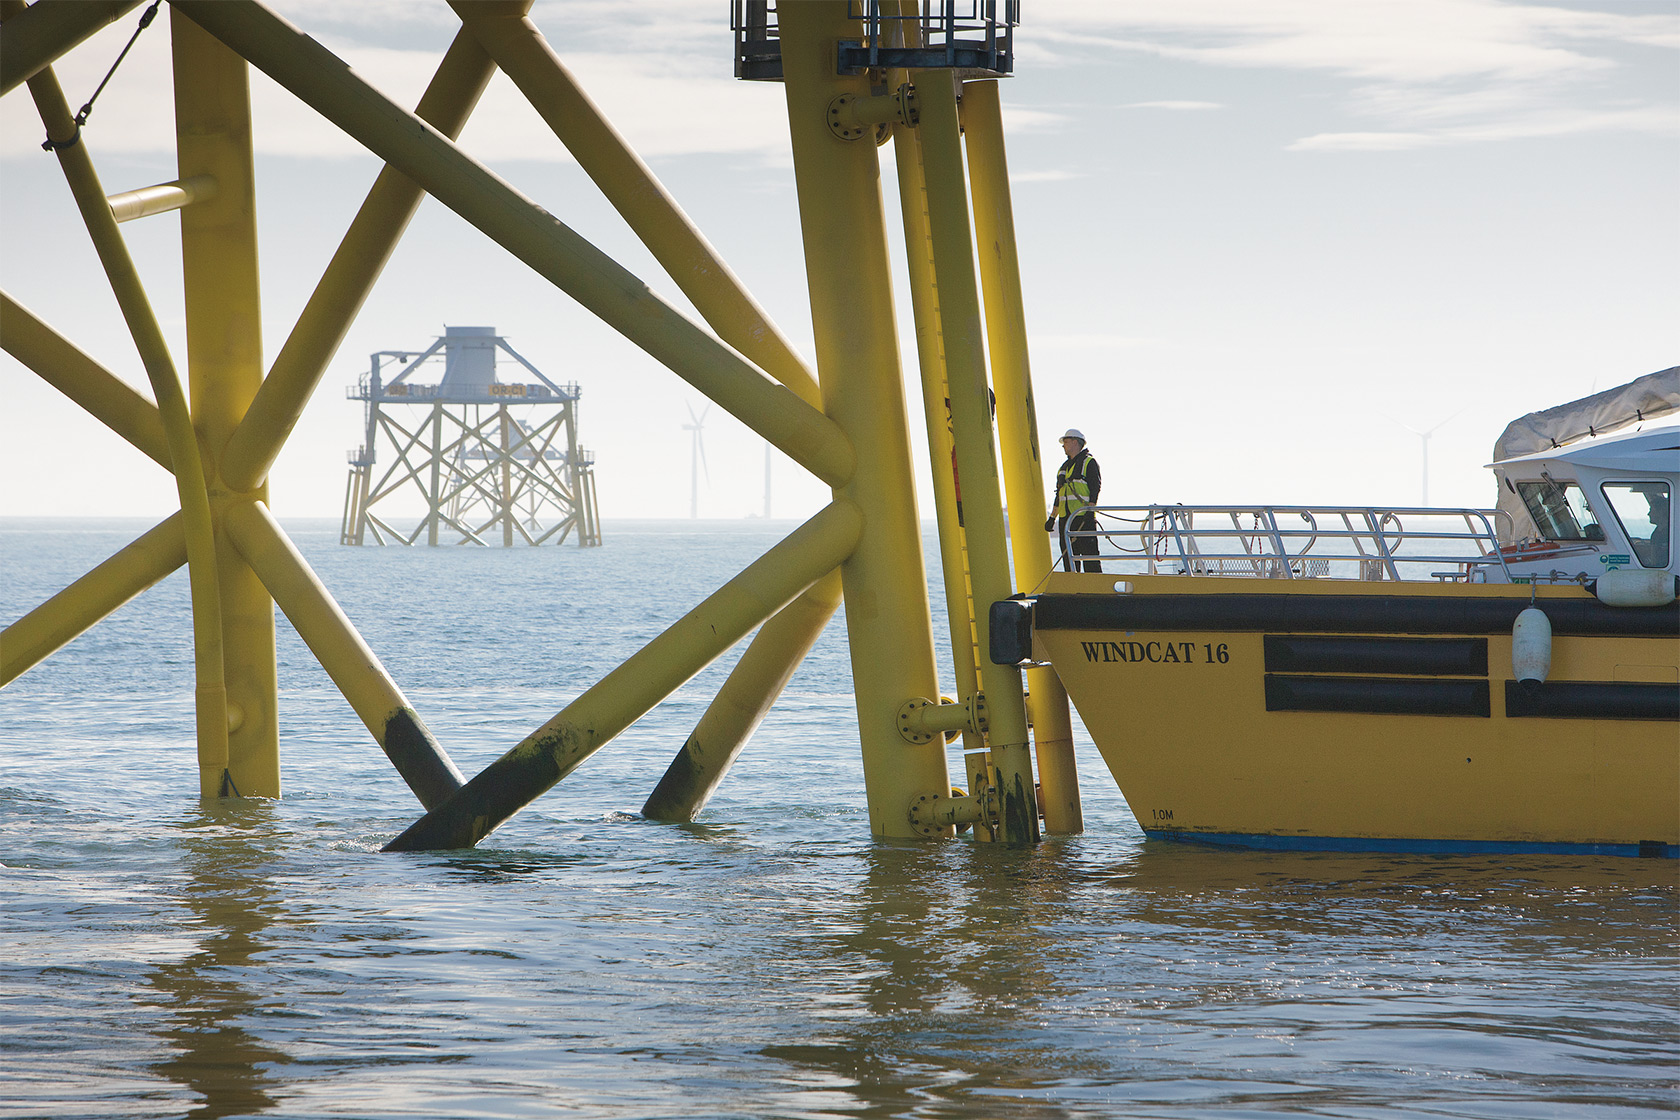 Man on a ship inspecting foundations at Ormonde offshore wind farm